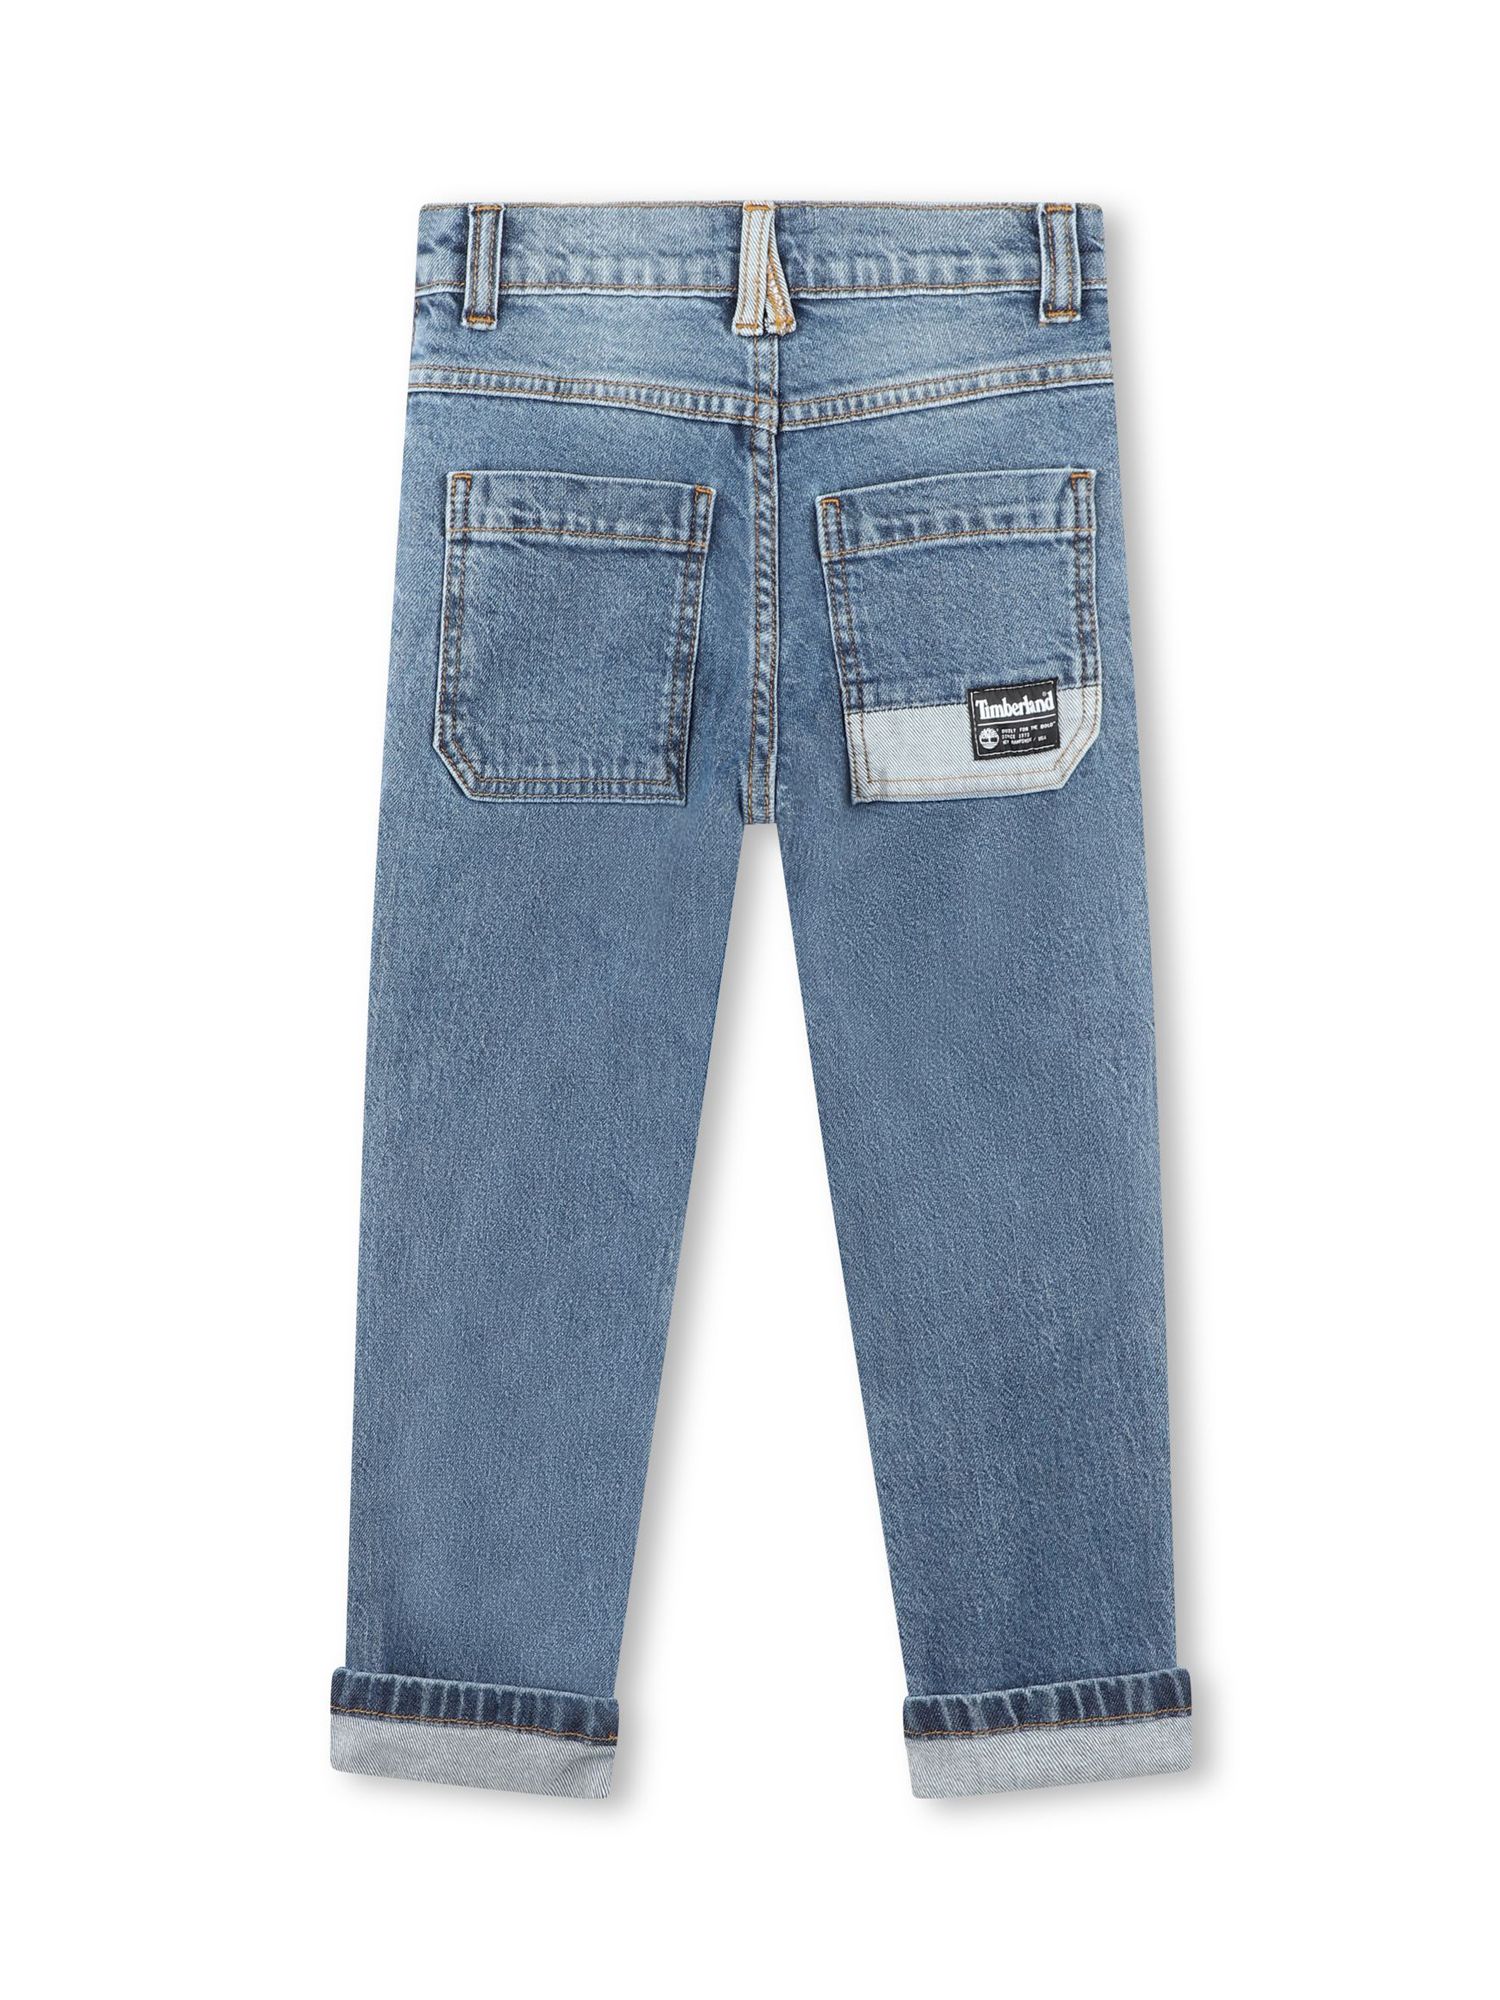 Buy Timberland Kids' New Fit Denim Trousers, Mid Blue Online at johnlewis.com